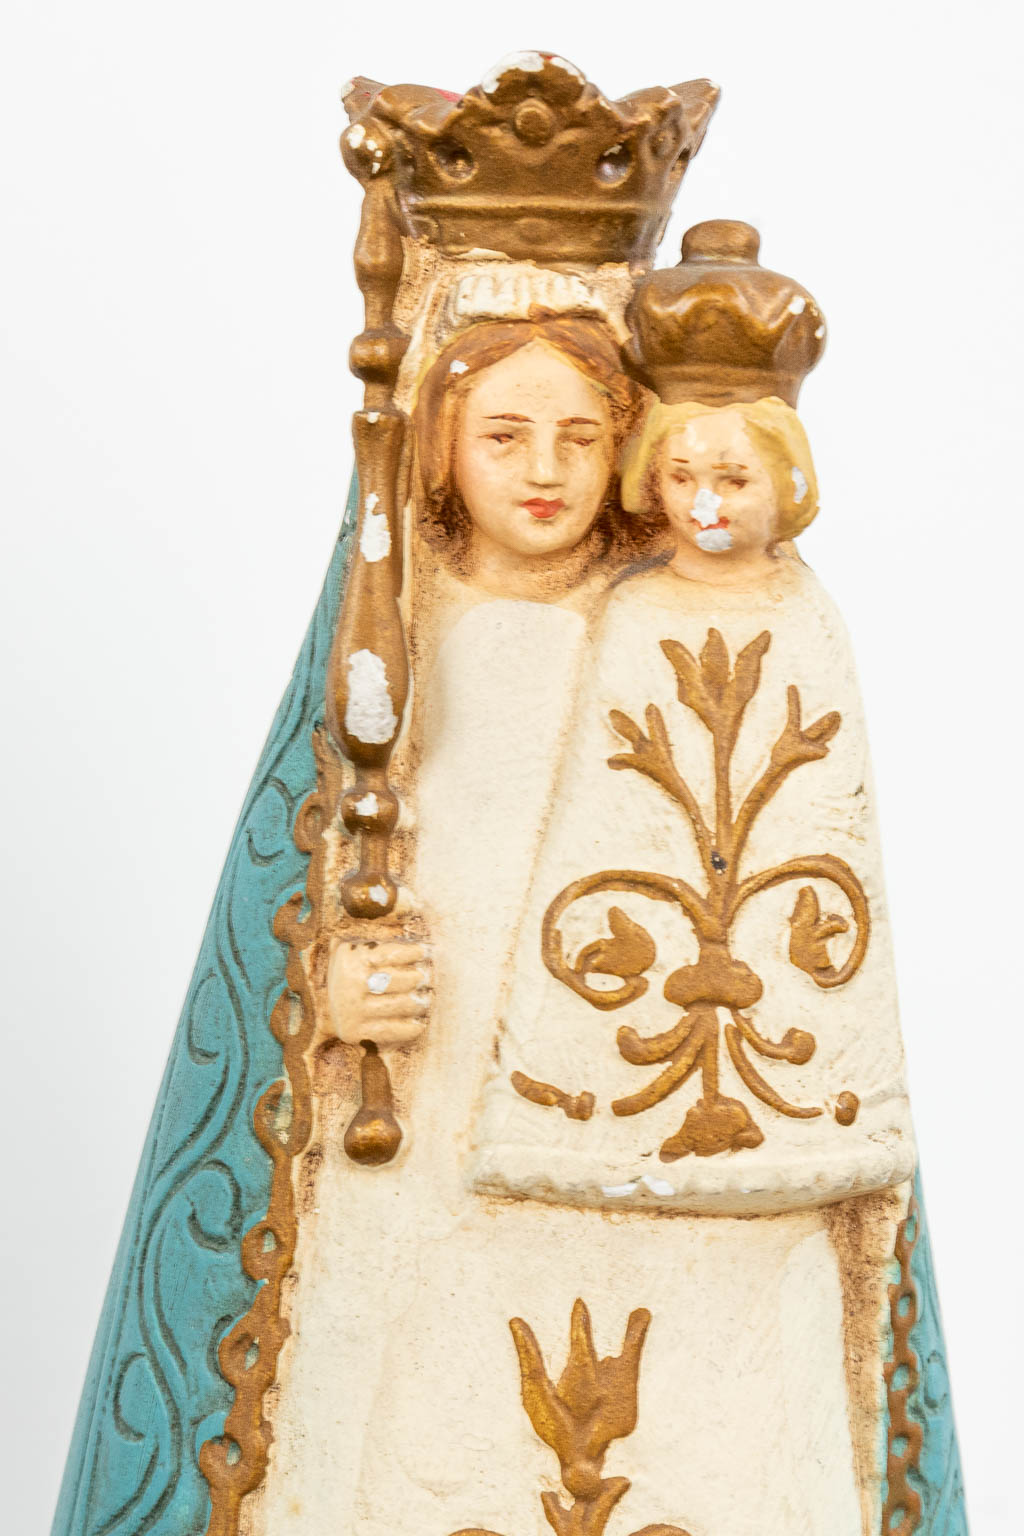 A large collection of statues of Holy figurines, made of polychrome and monochrome plaster and marble. (H:79cm)